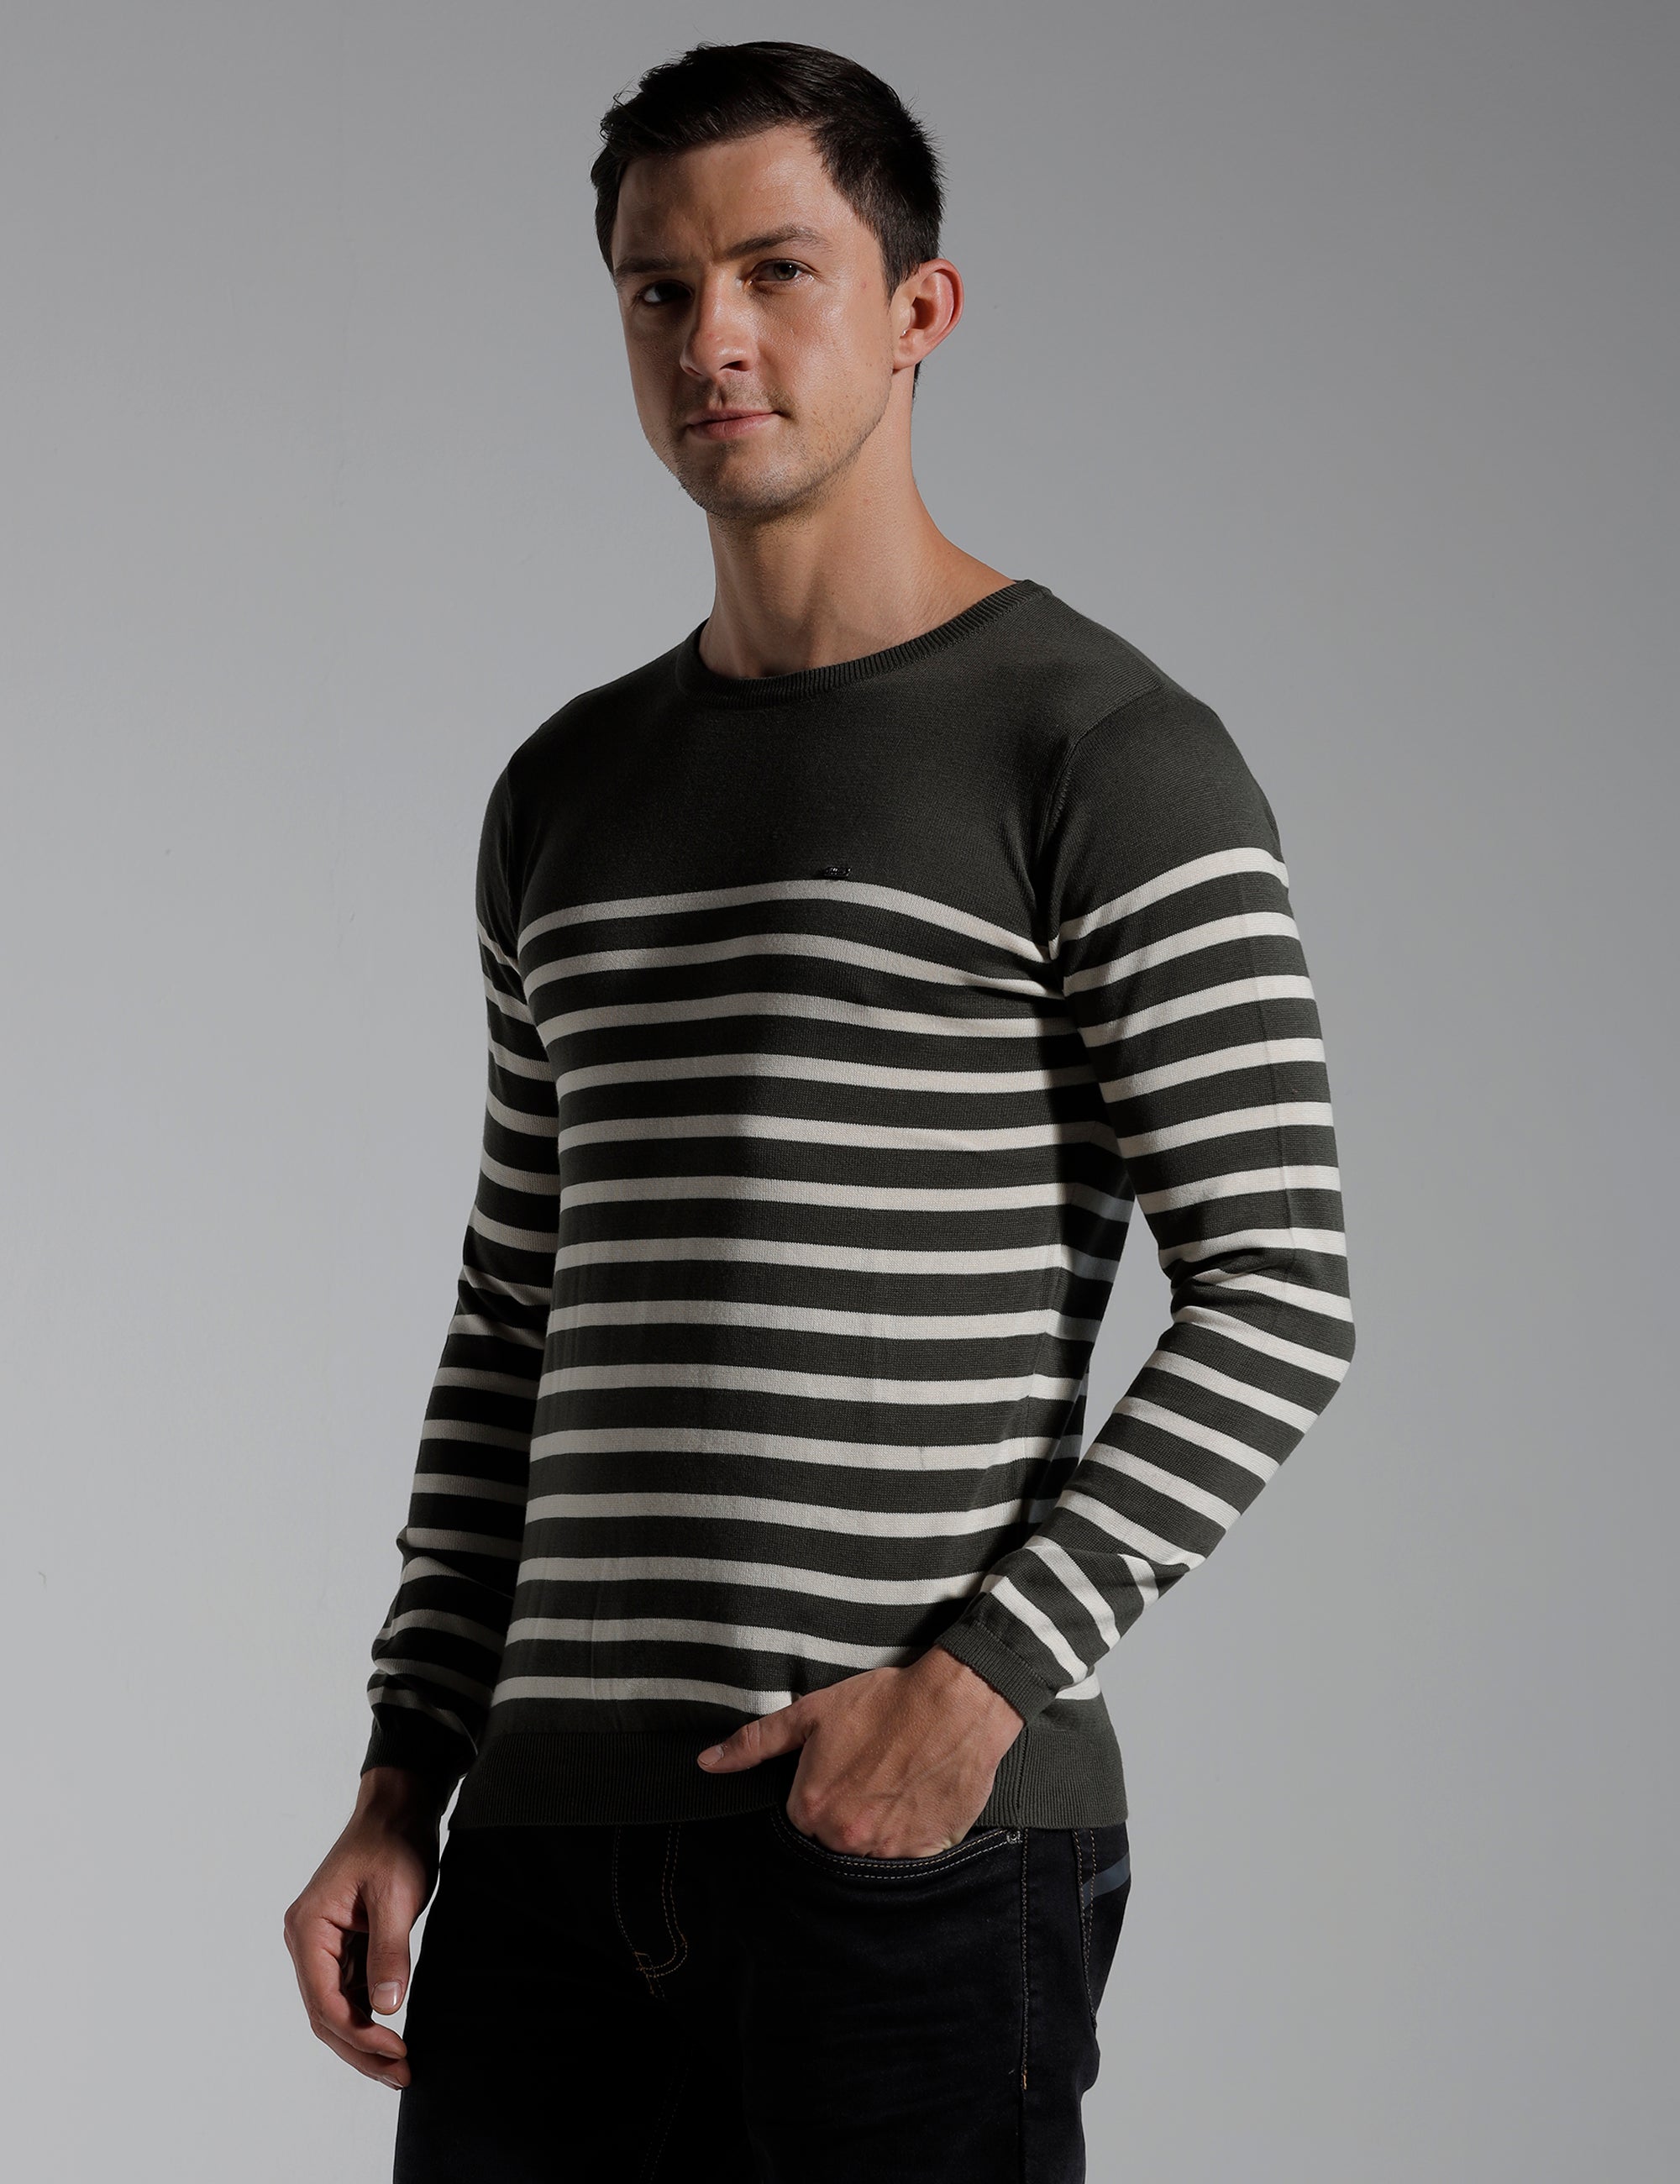 Identiti Full Sleeve Striped Slim Fit Cotton Casual Pull Over T-shirt For Men